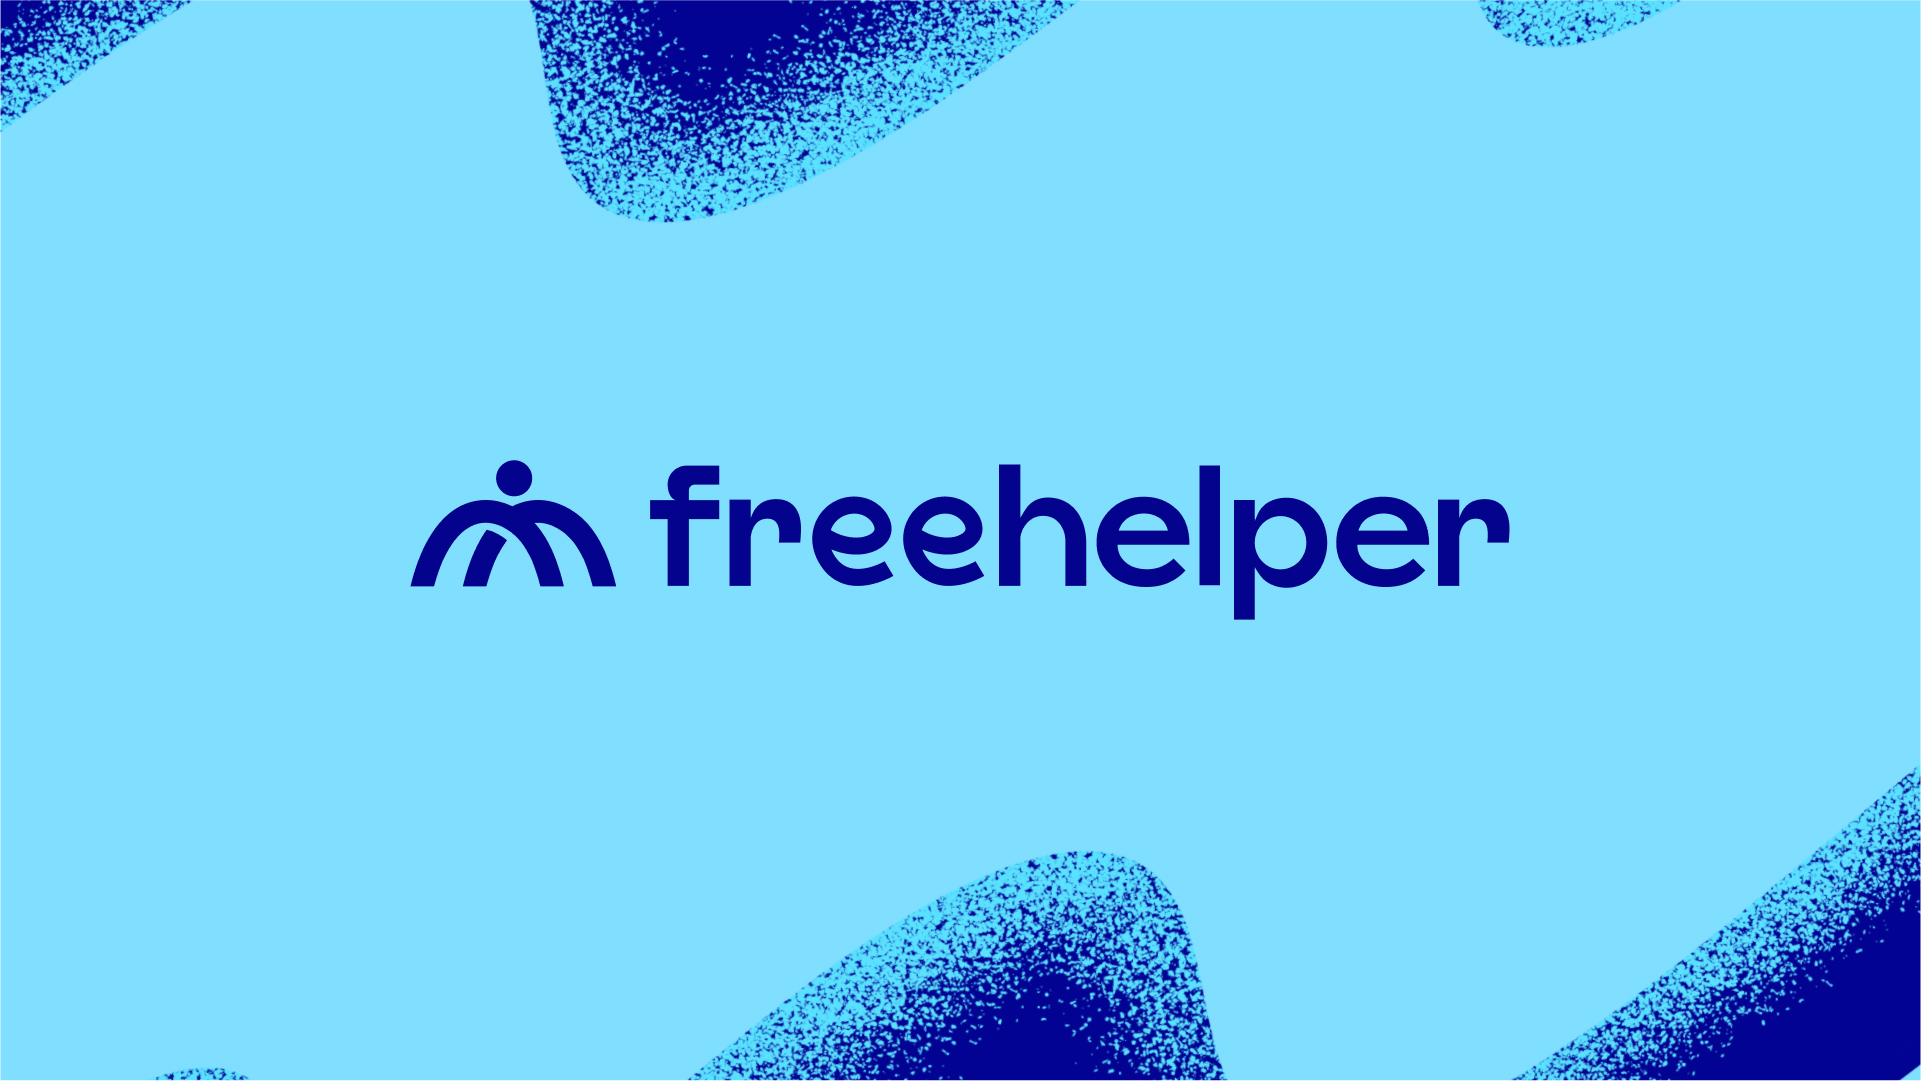 From Vision to Visuals: Crafting Freehelper’s New Brand Identity Created by Studio Carthagos